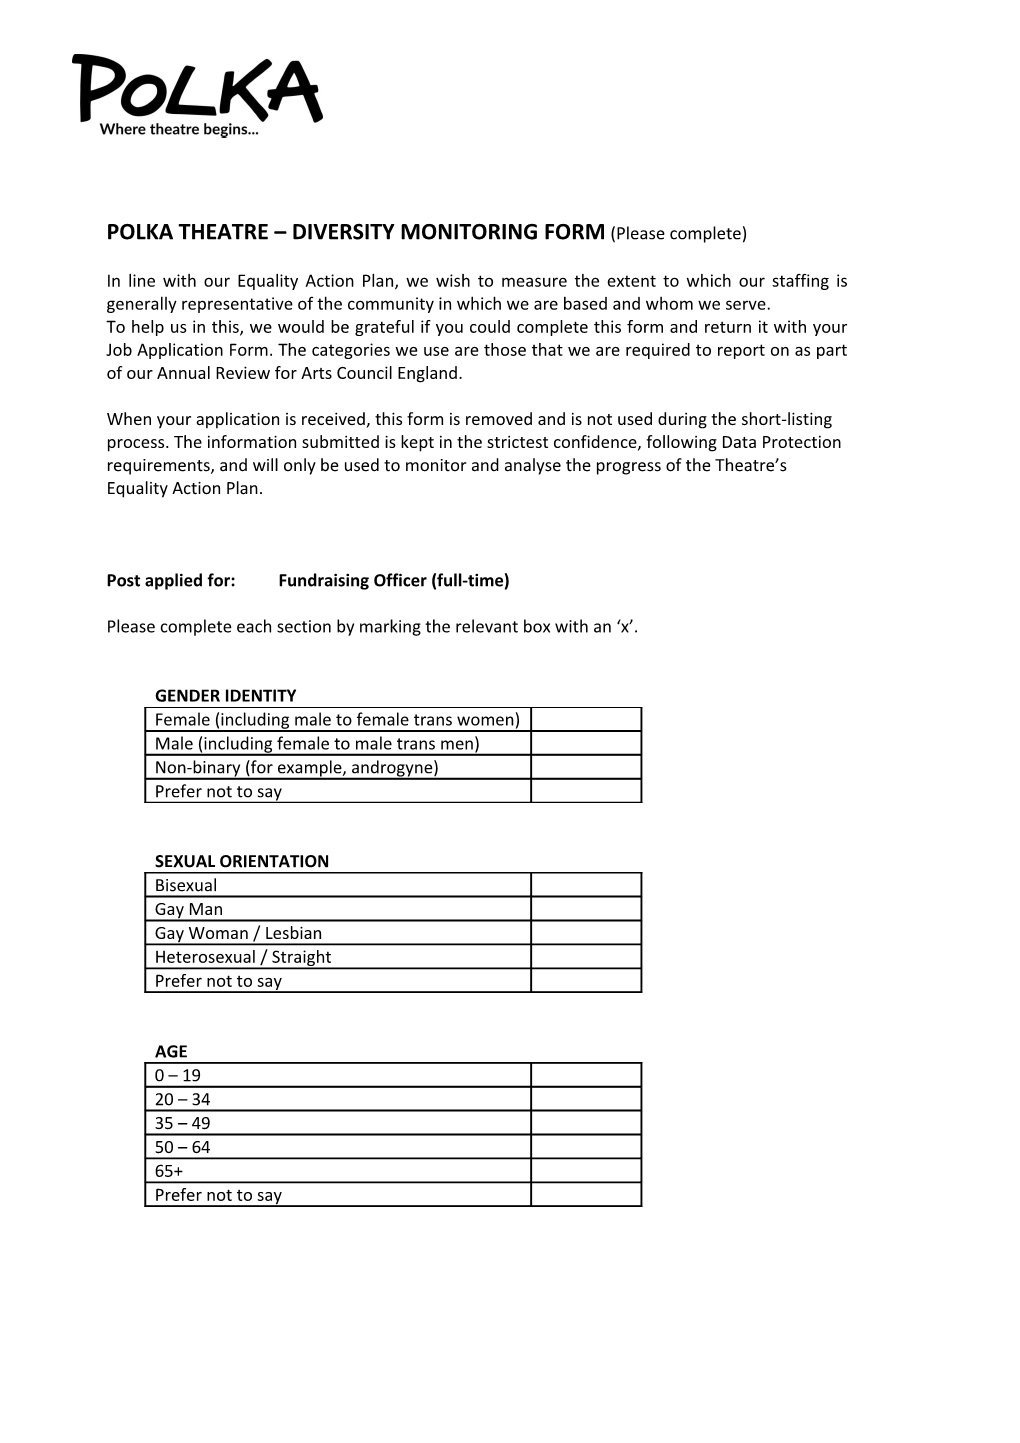 POLKA THEATRE DIVERSITY MONITORING FORM (Please Complete)